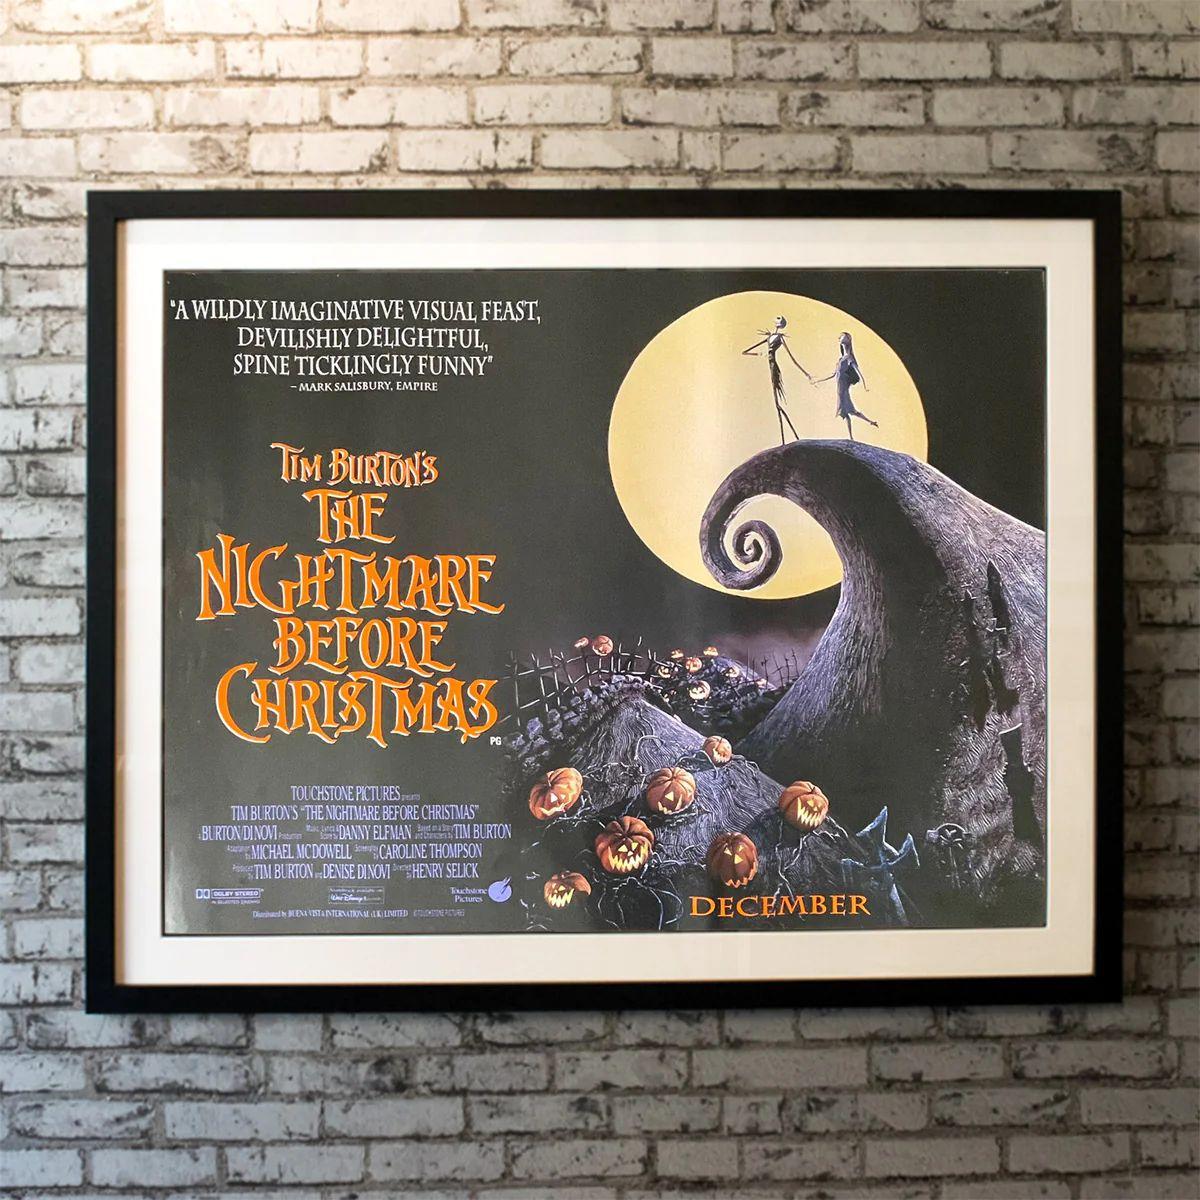 The Nightmare Before Christmas, Unframed Poster, 1993

Original British Quad (30 X 40 Inches). Jack Skellington, king of Halloween Town, discovers Christmas Town, but his attempts to bring Christmas to his home causes confusion.

Additional